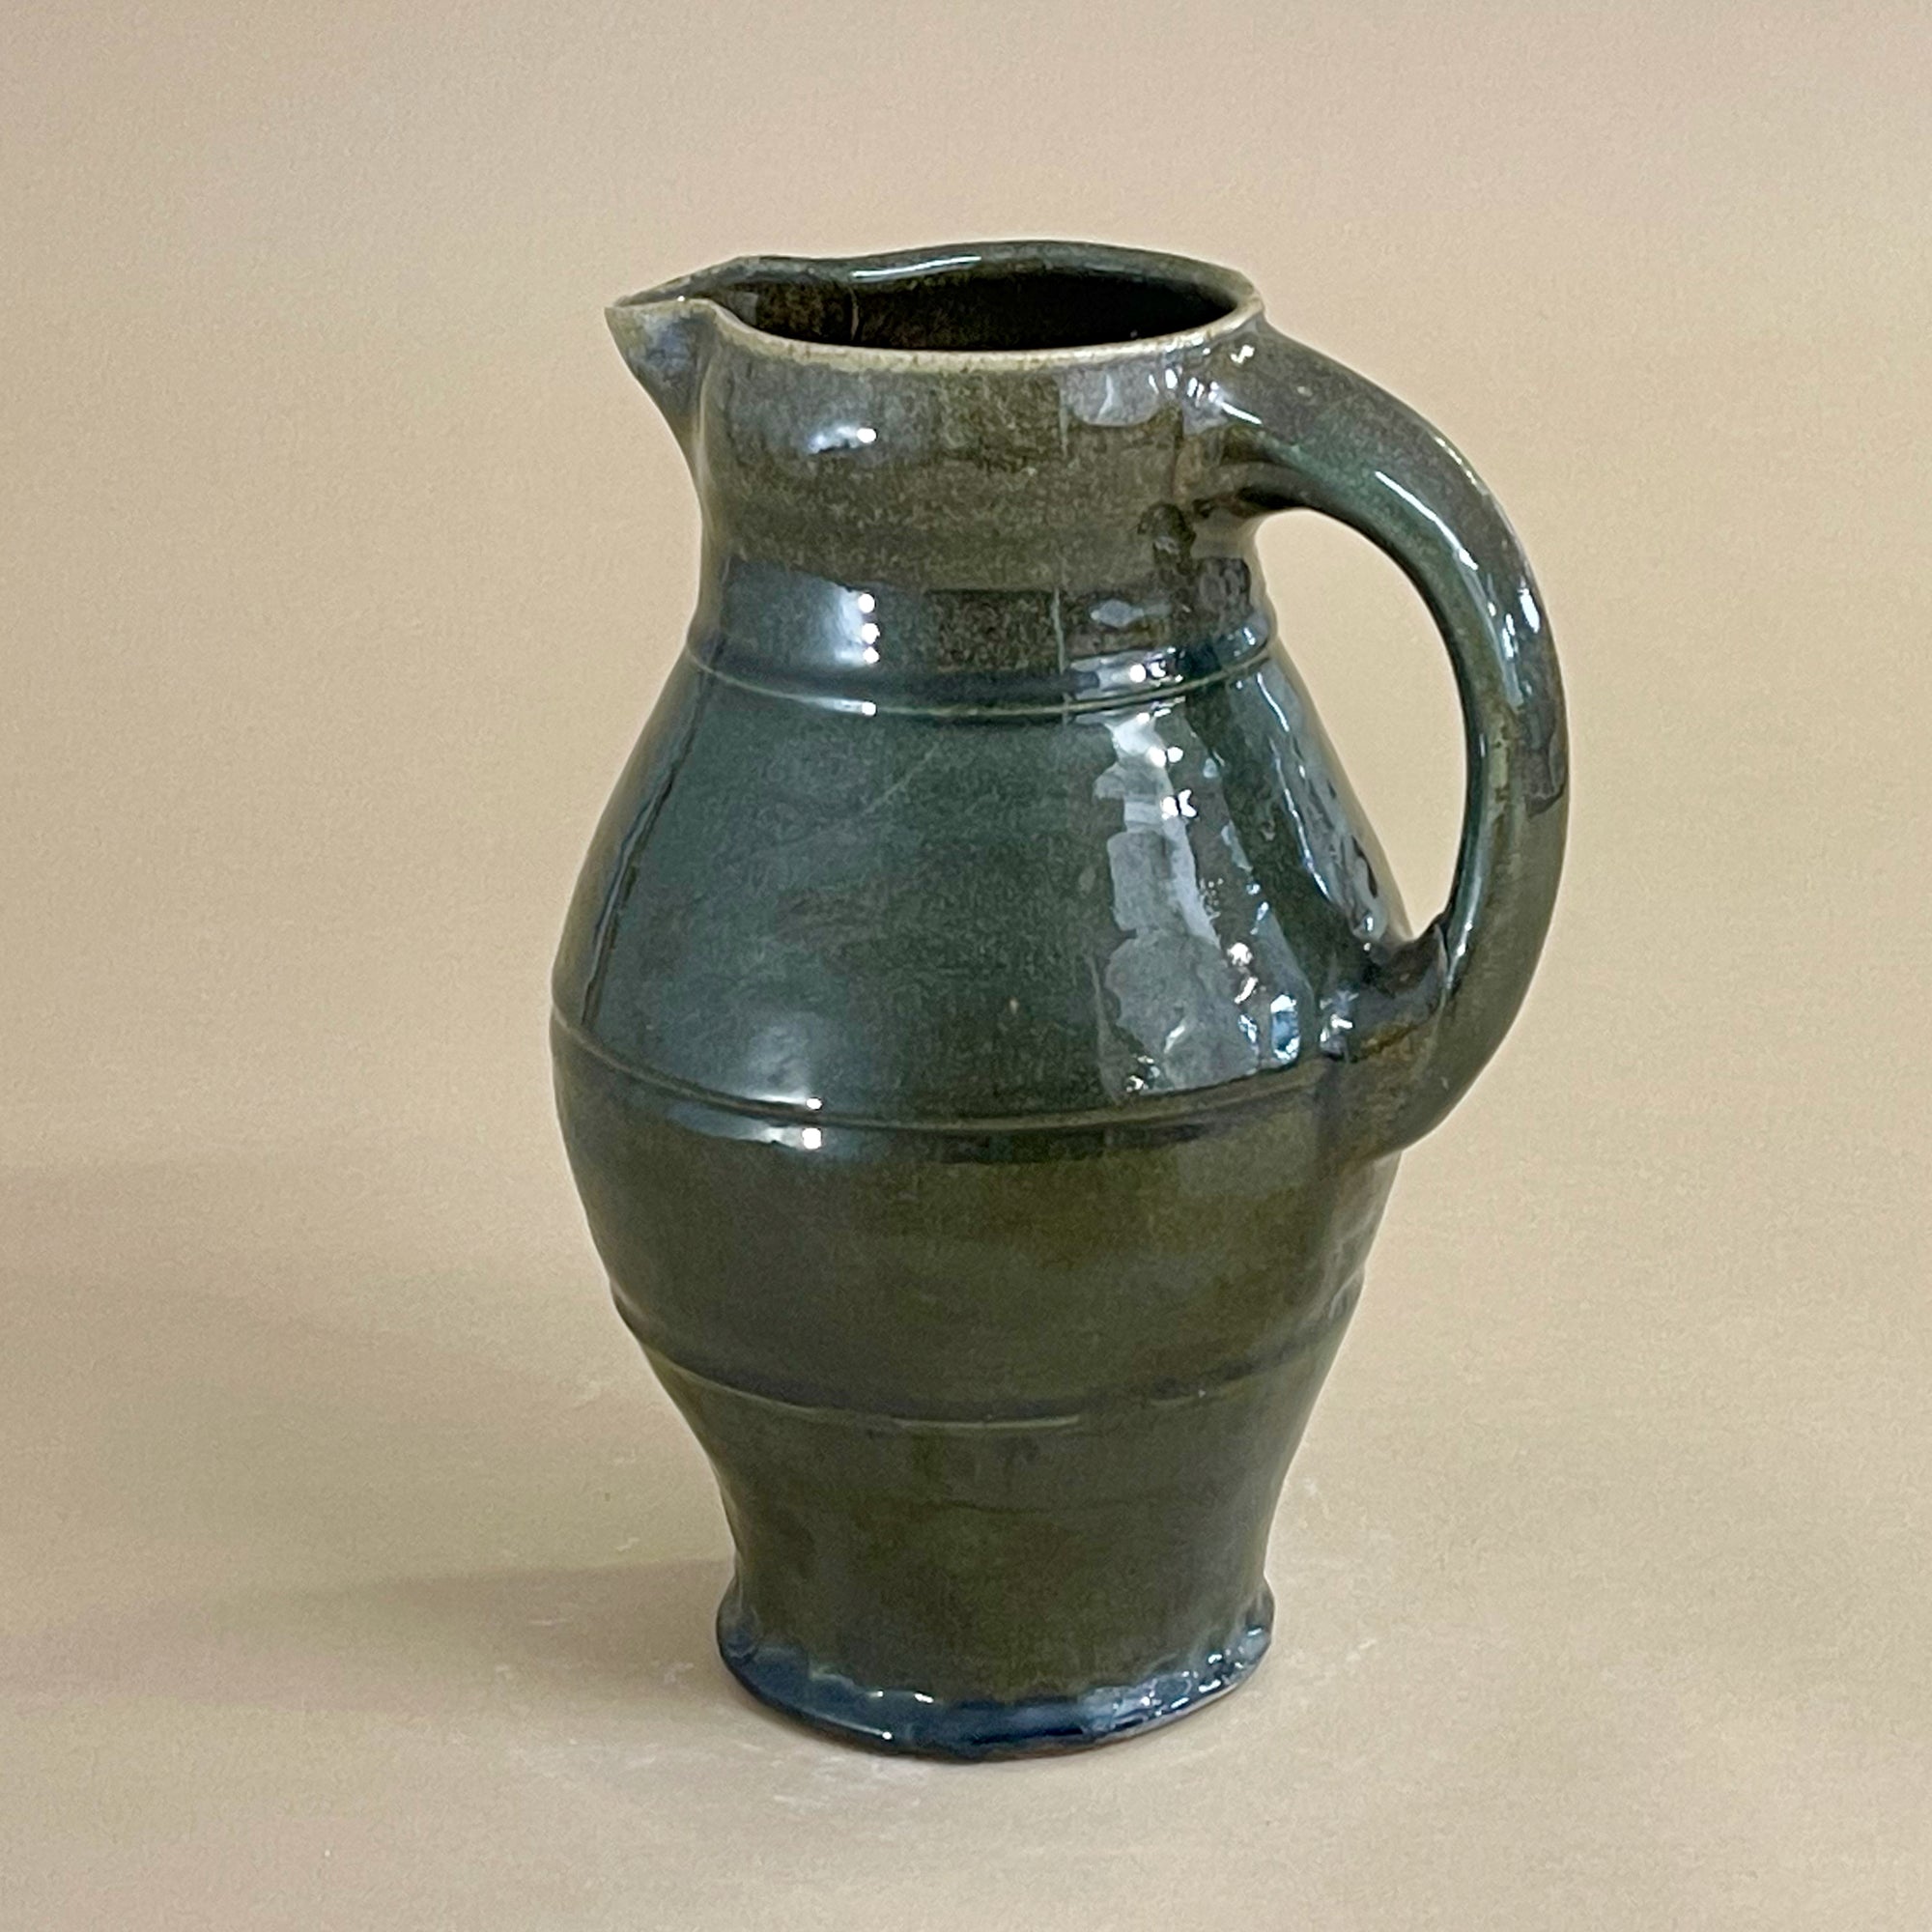 One of a Kind Soda-Fired Baluster Pitcher, Turquoise Glaze